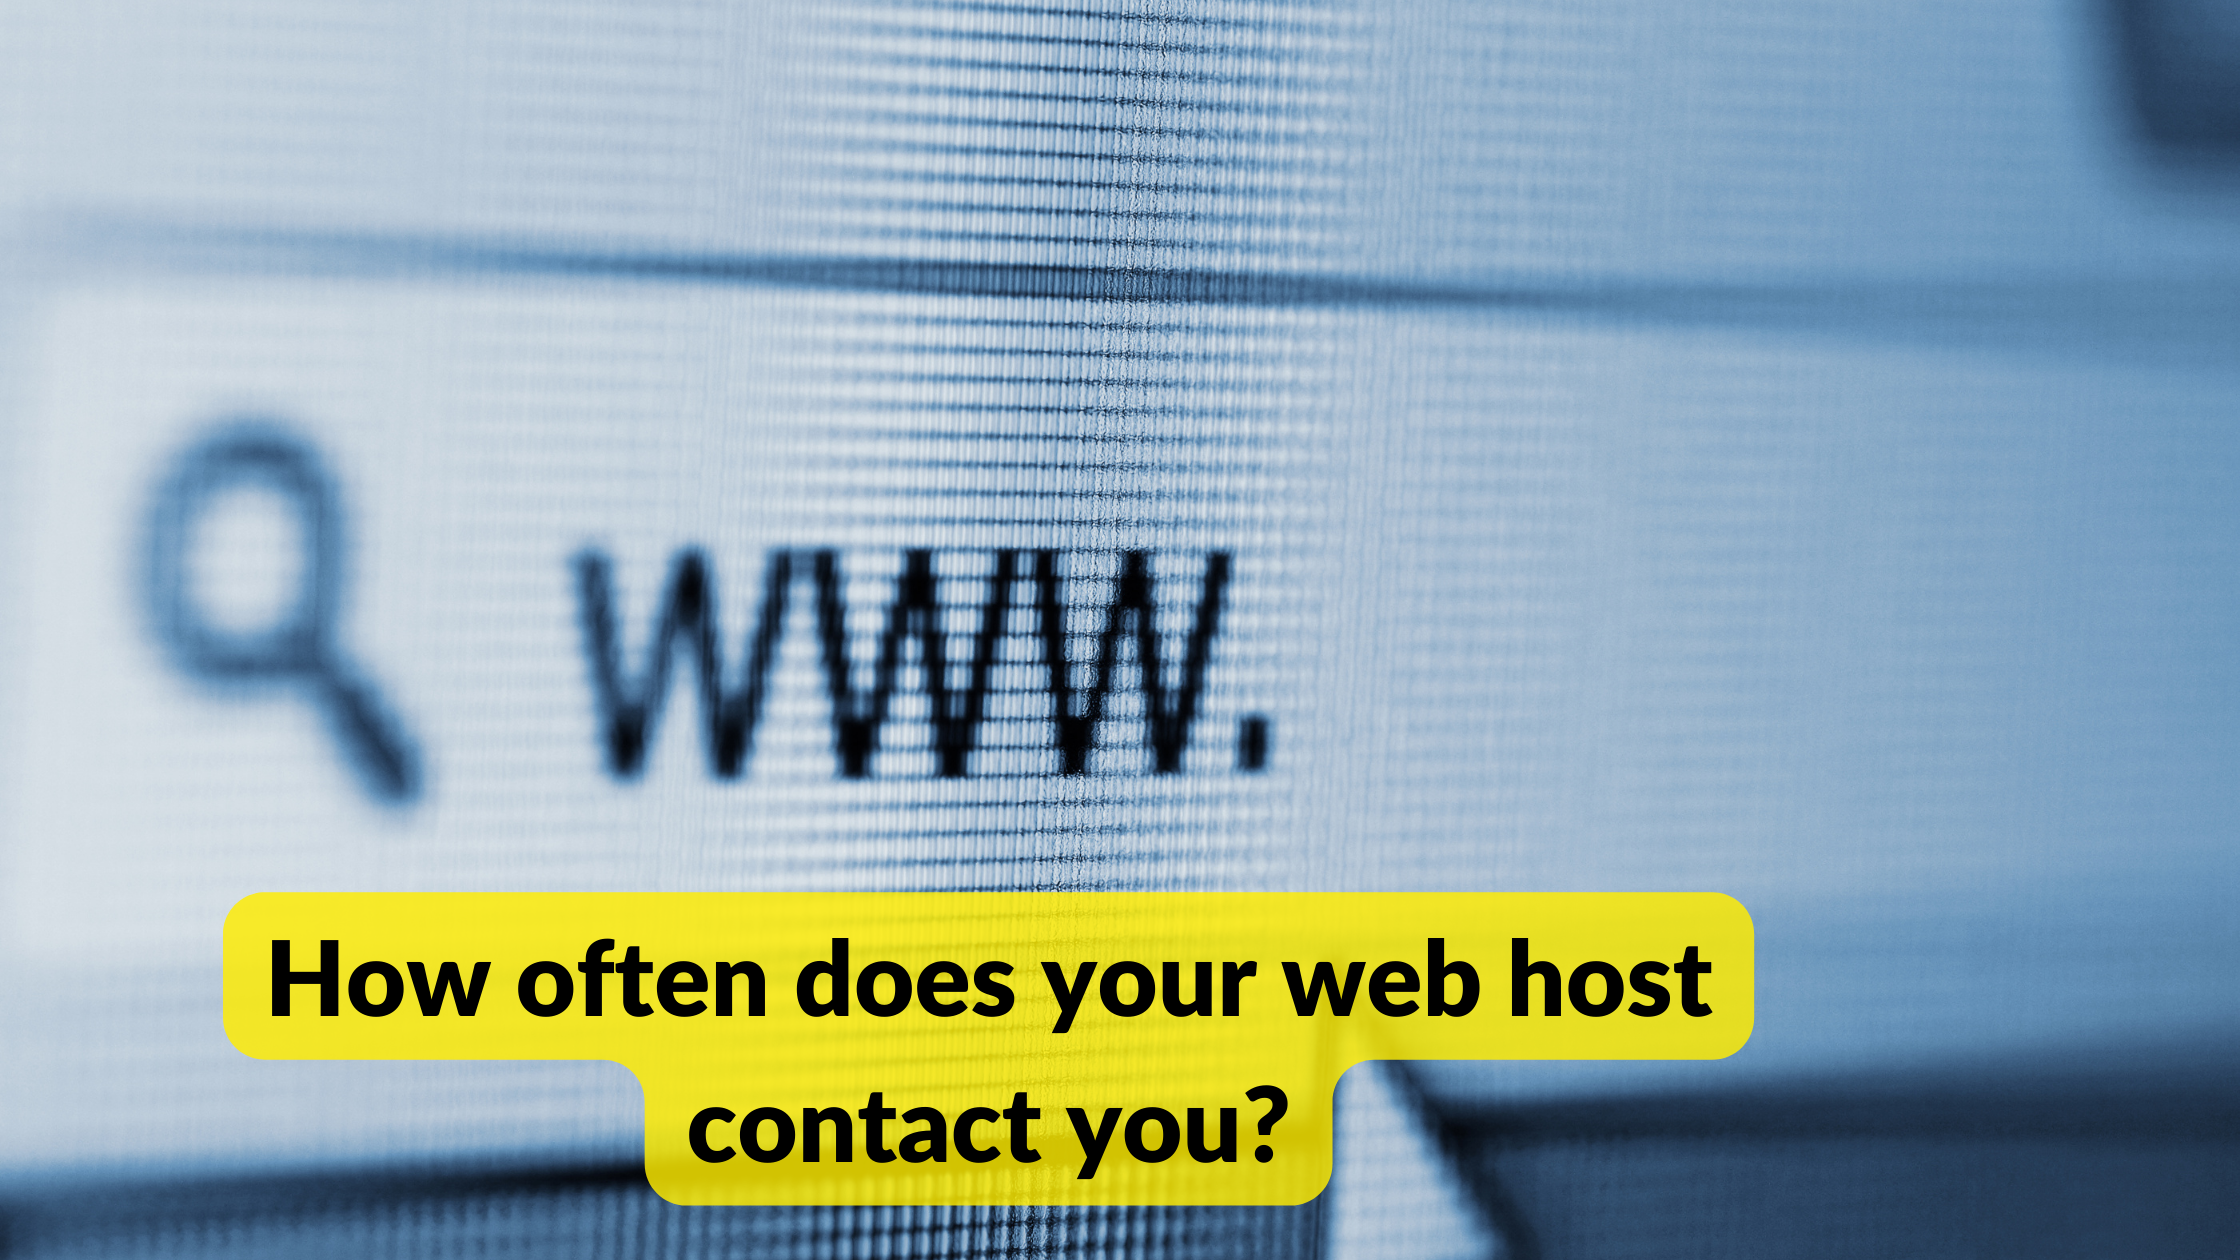 How often does your web host contact you?